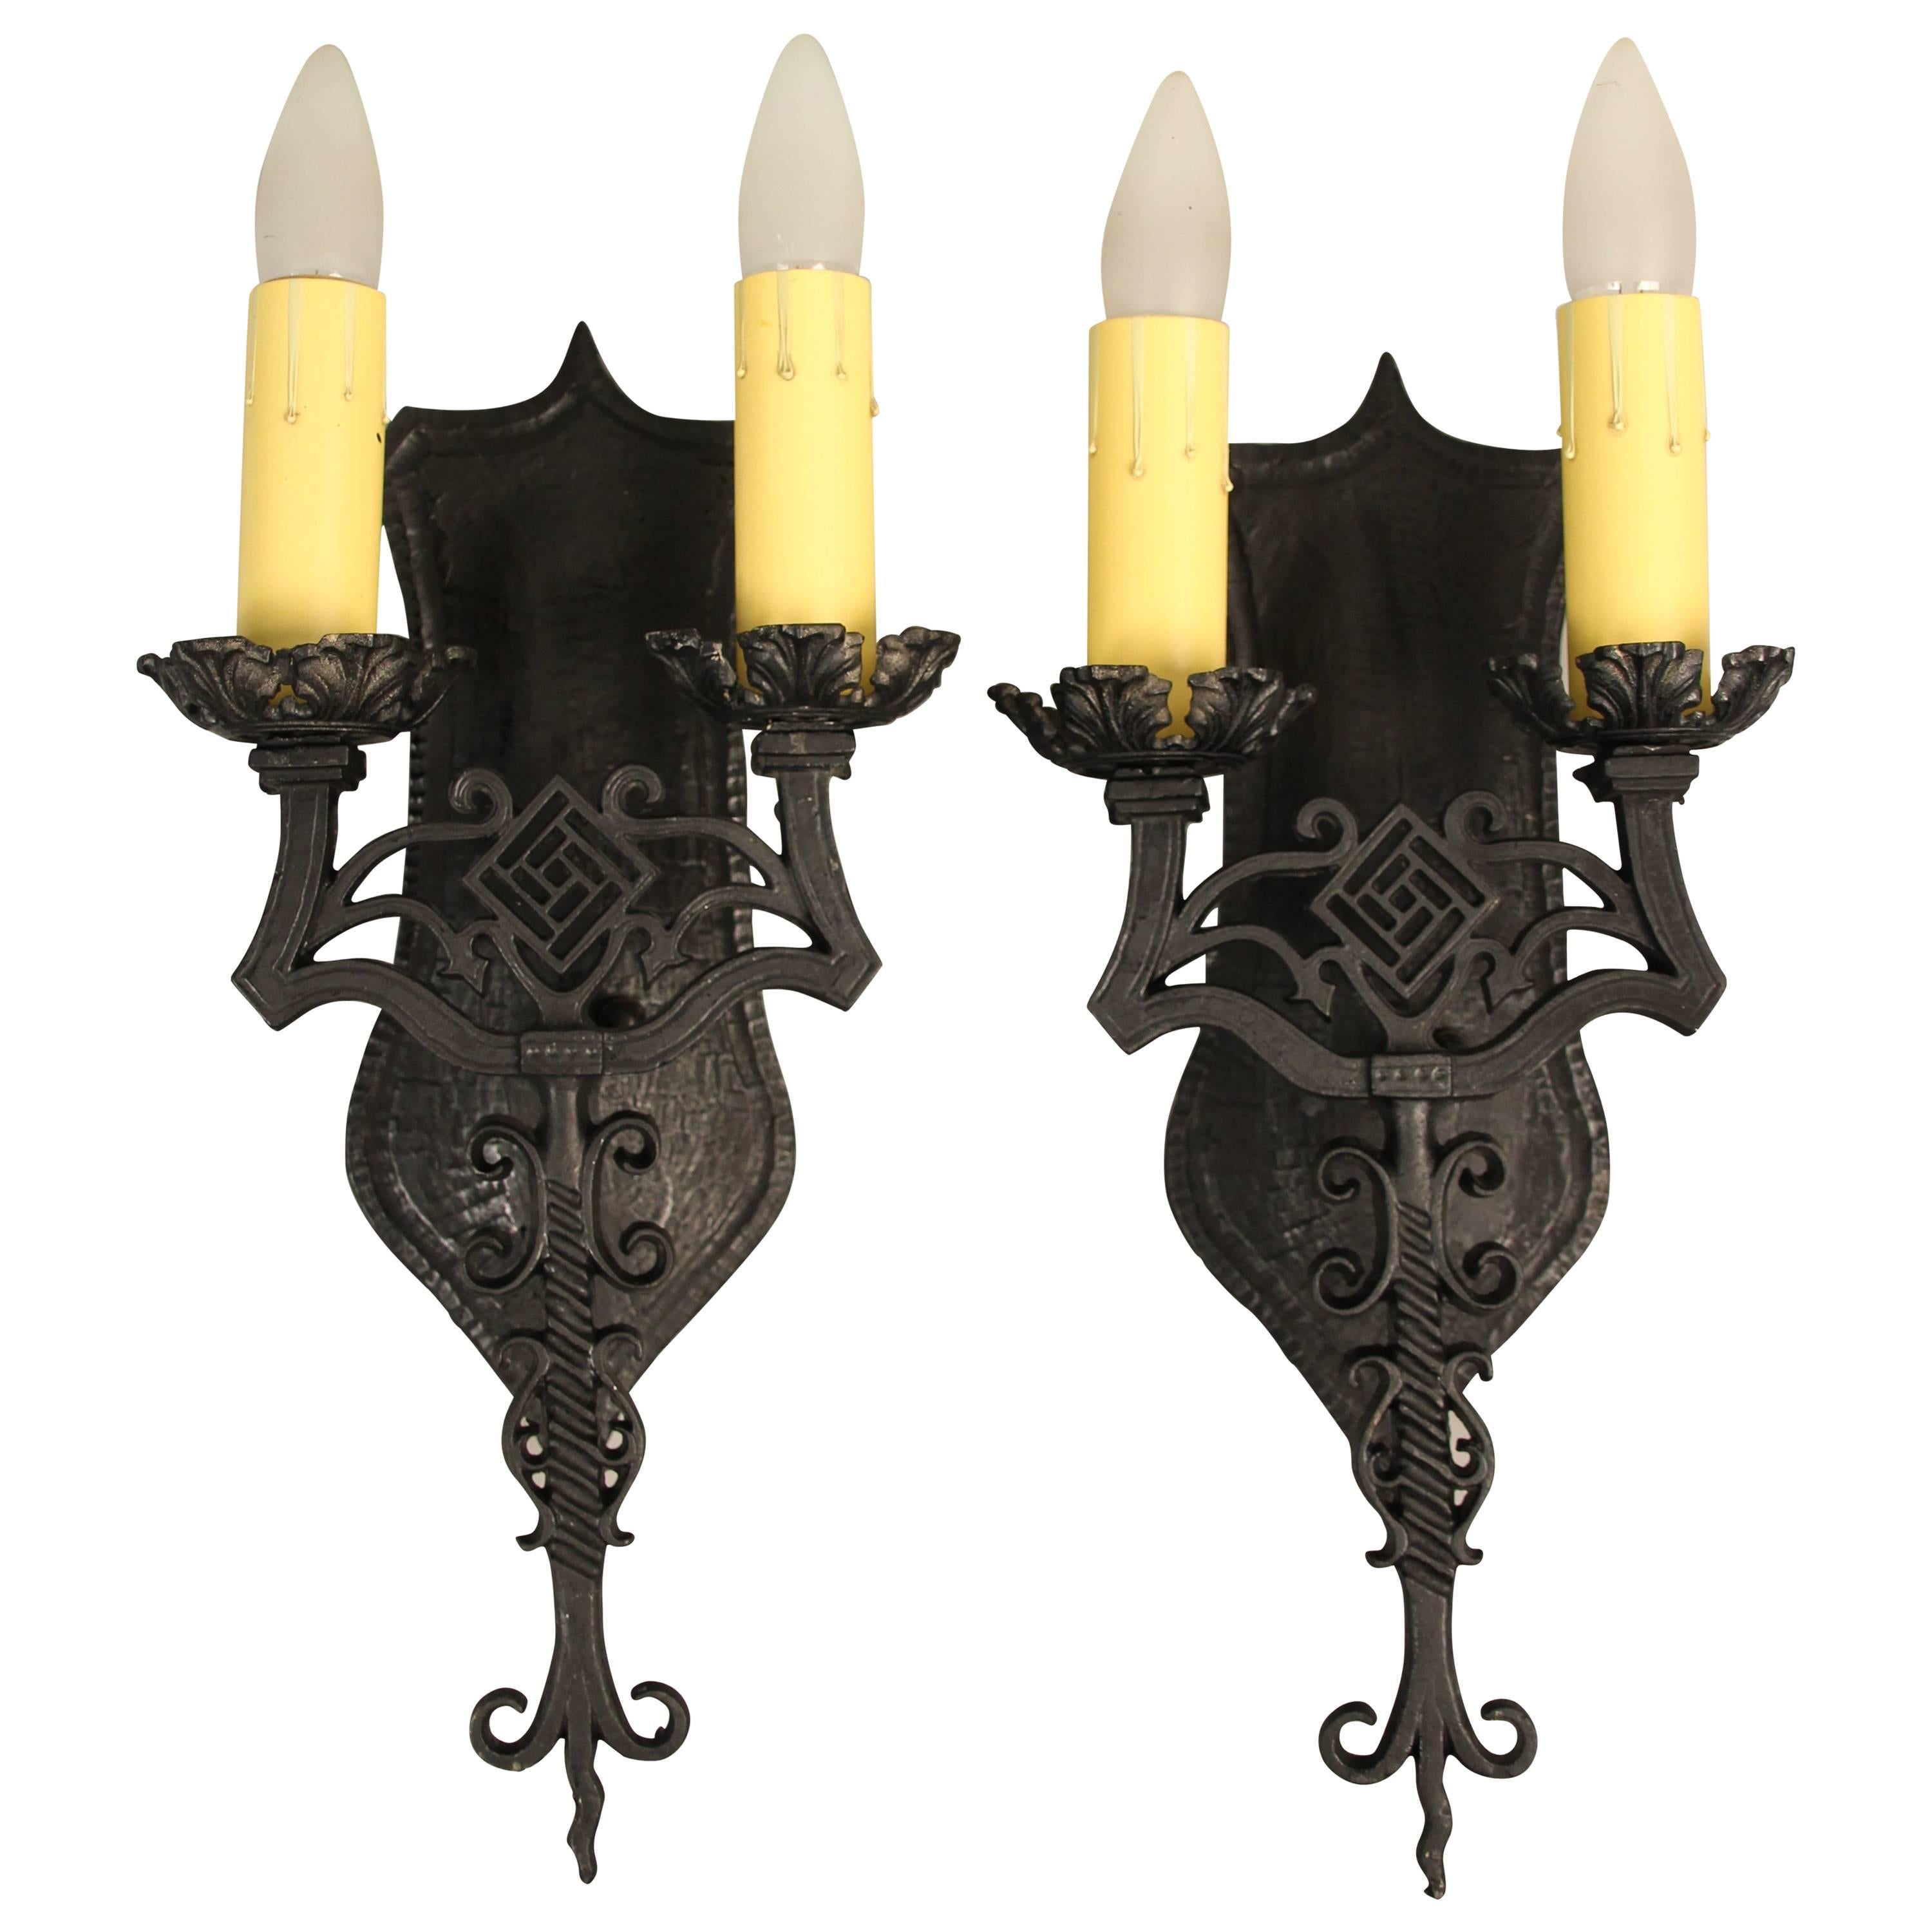 Pair of Double Spanish Revival Sconces